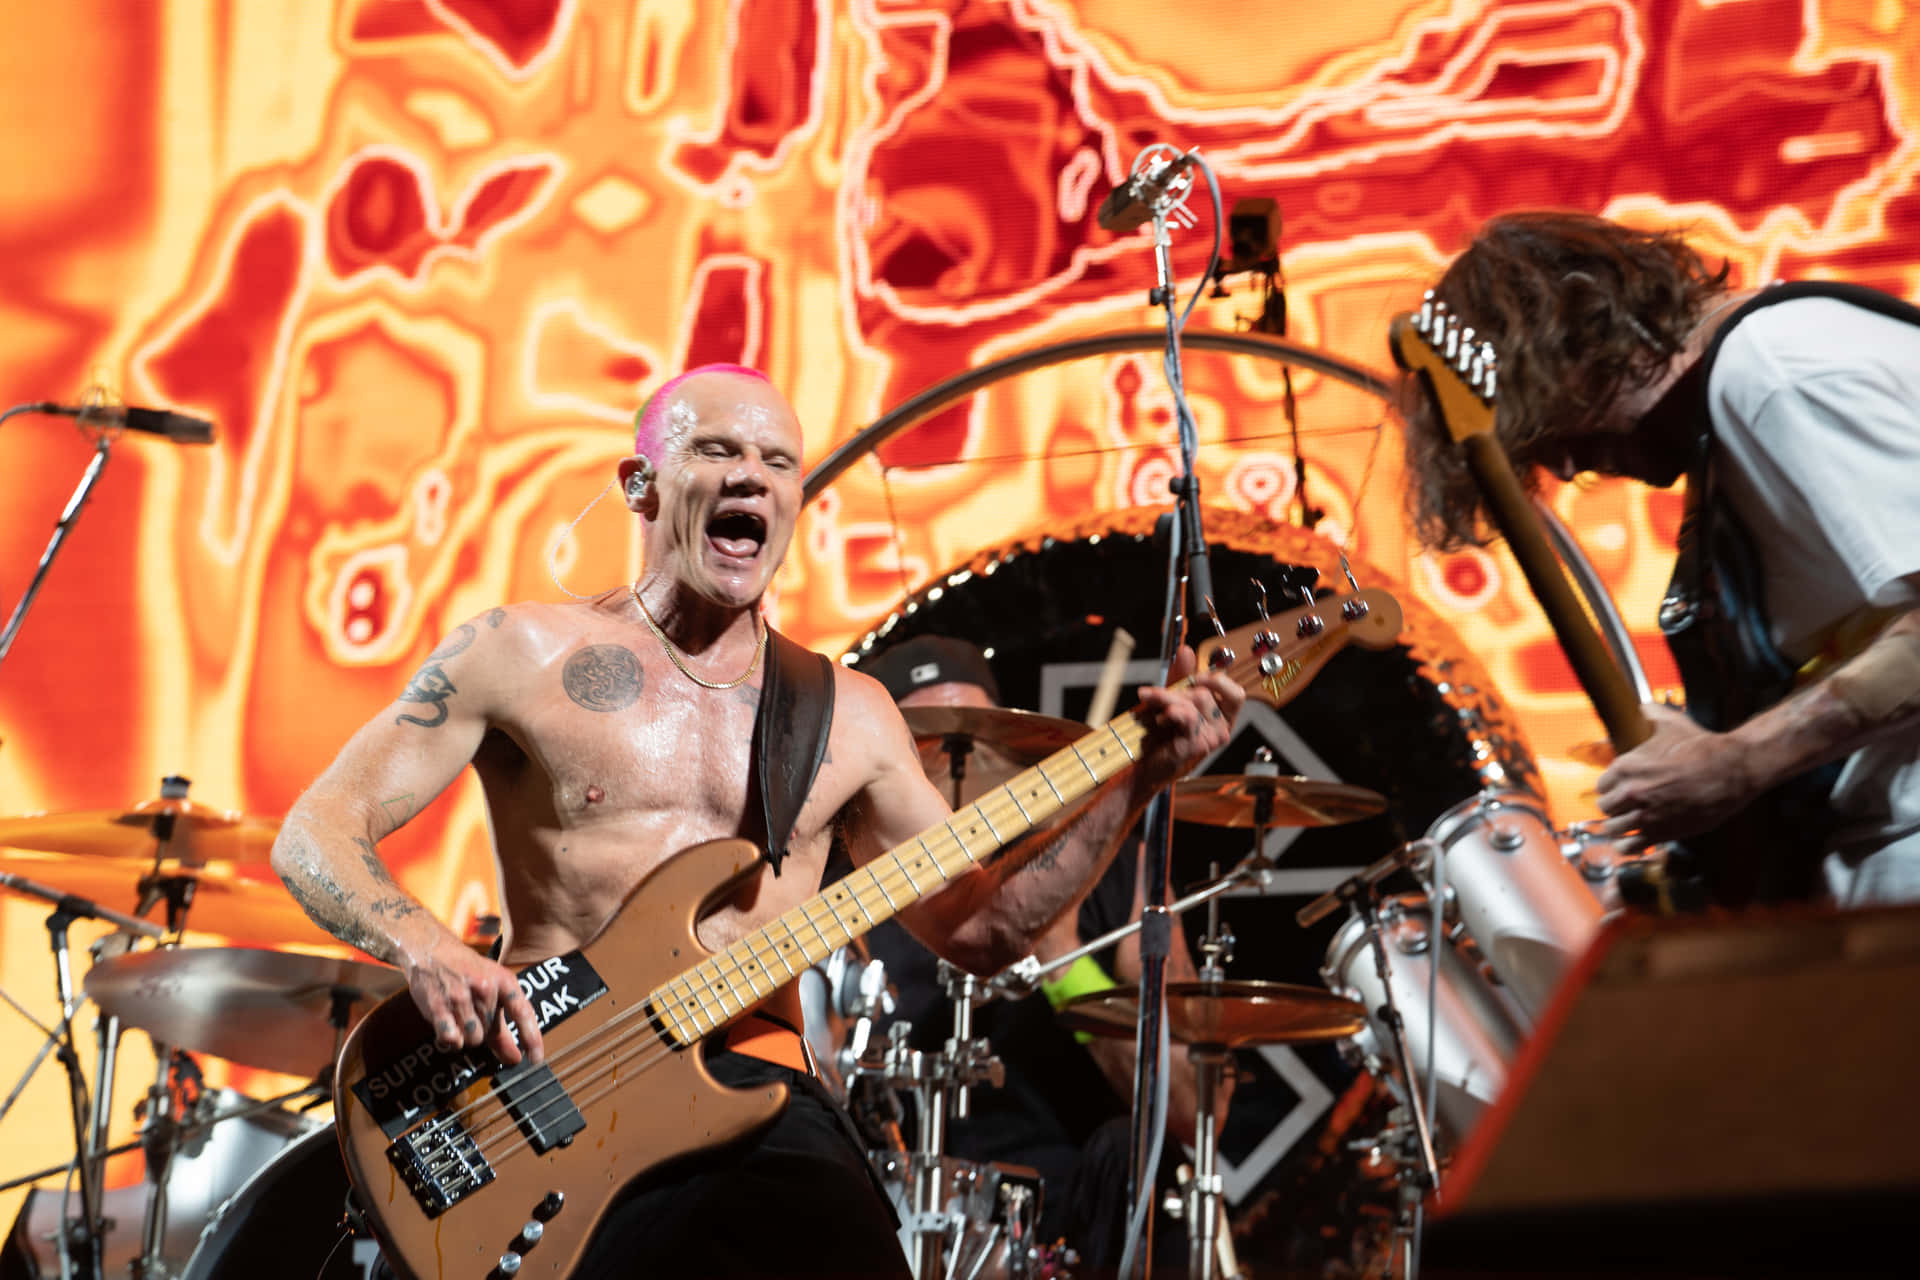 1920x1080  1920x1080 red hot chili peppers computer background   Coolwallpapersme